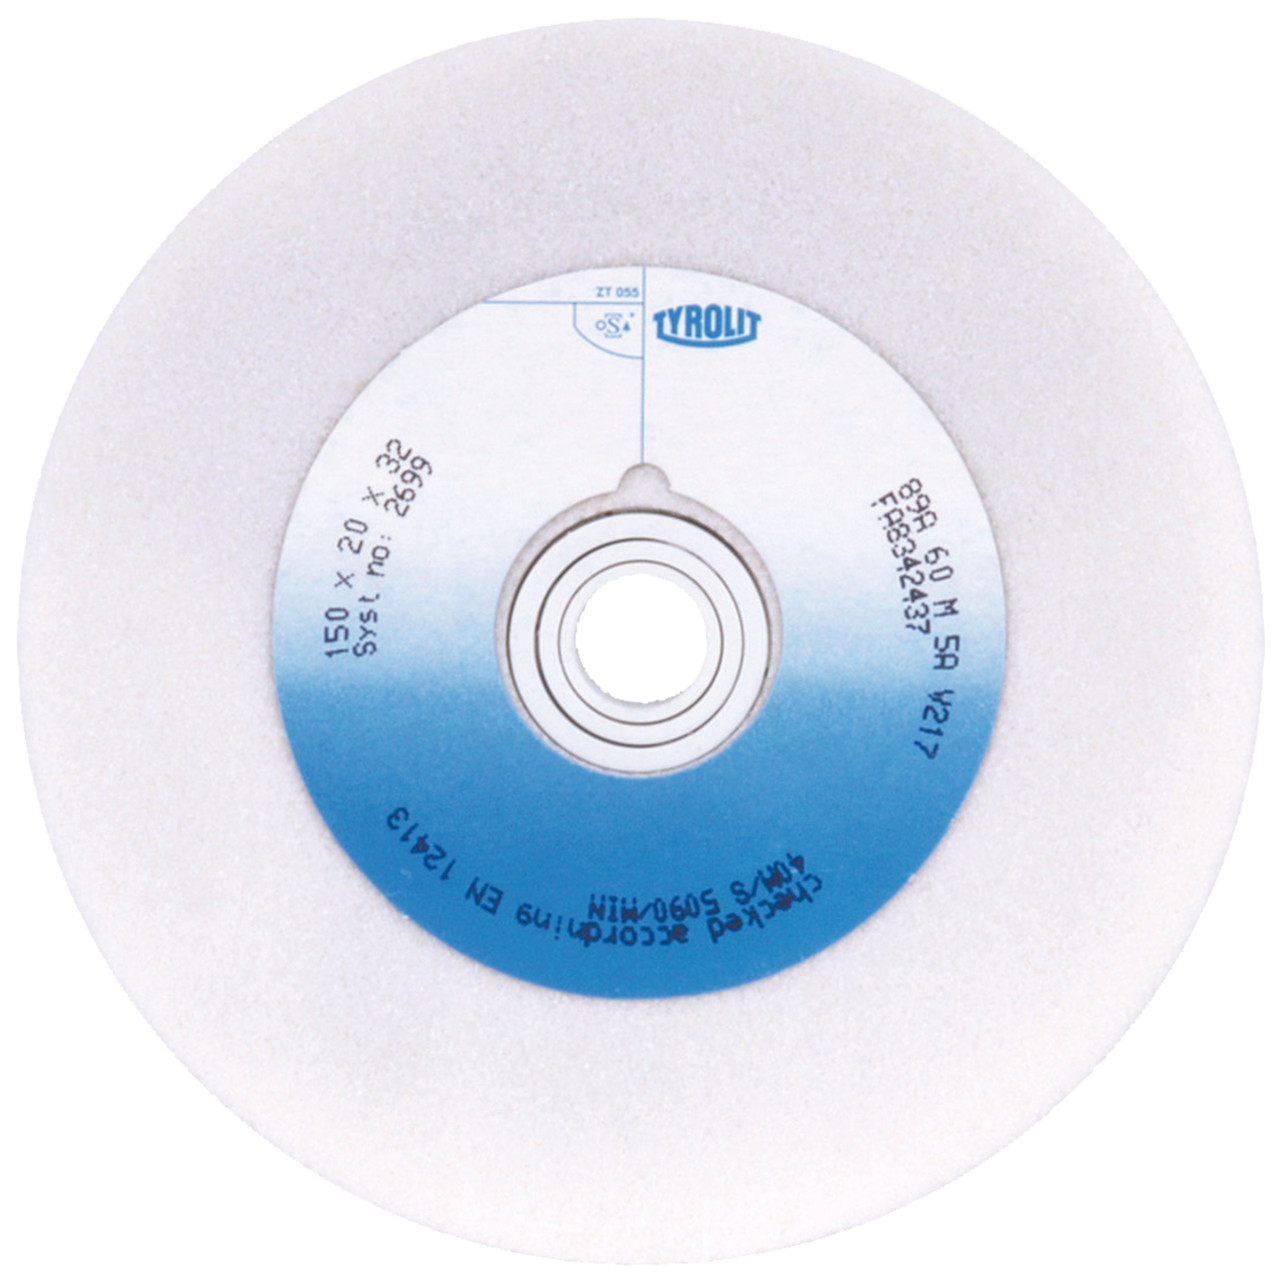 Tyrolit Conventional ceramic grinding discs DxDxH 200x20x32 For high-alloy steels and HSS, shape: 1, Art. 16615